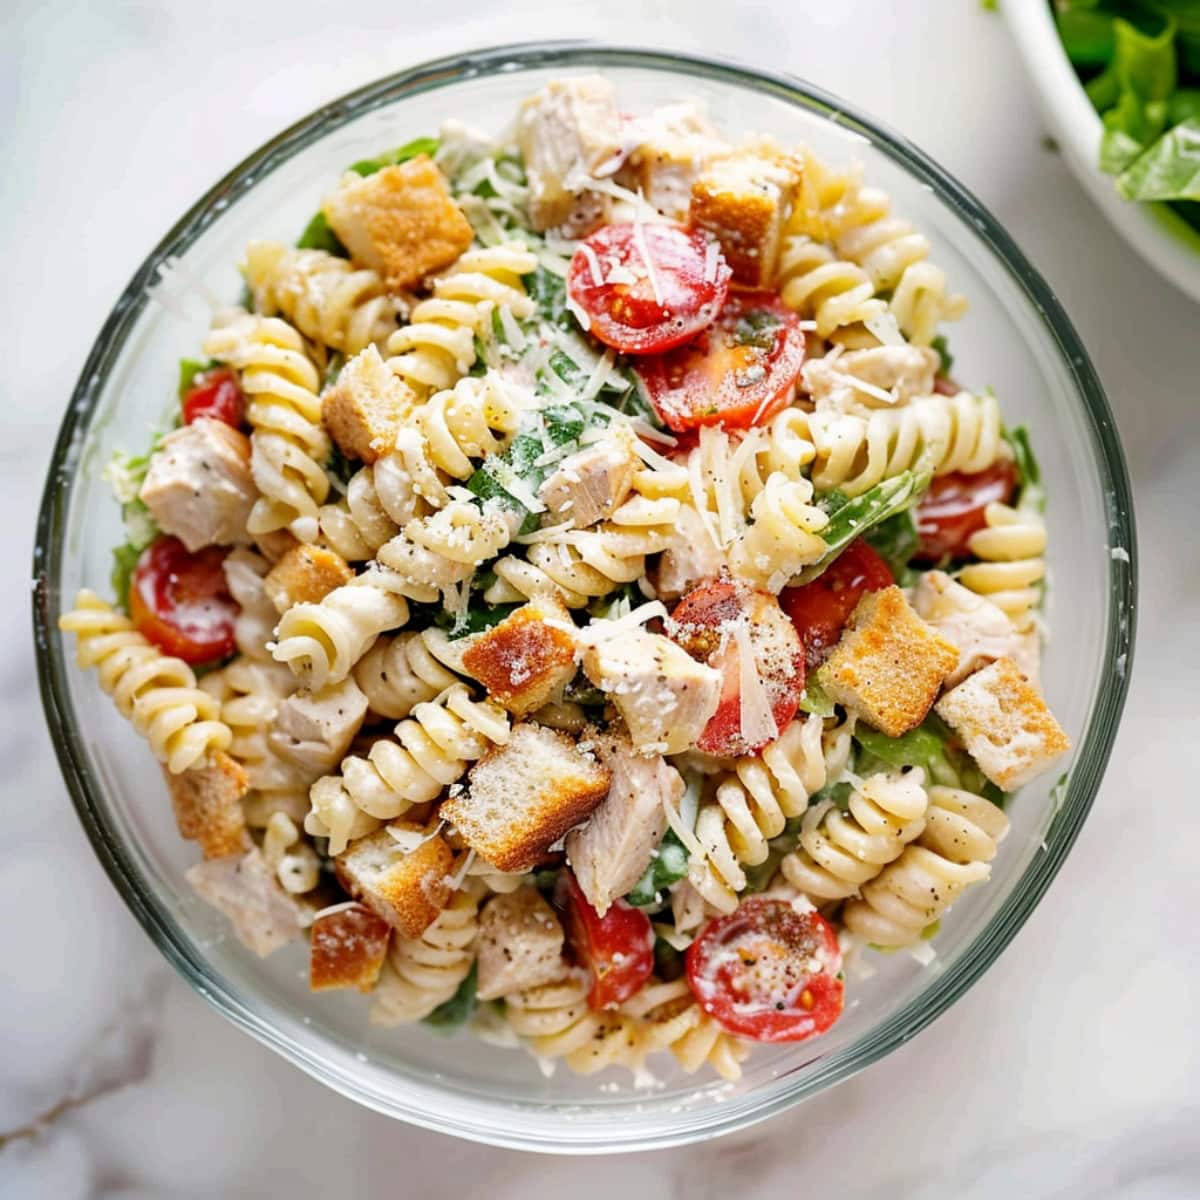 An irresistible pasta salad with a tantalizing mix of grilled chicken, romaine lettuce, rotini, and a creamy Caesar dressing.